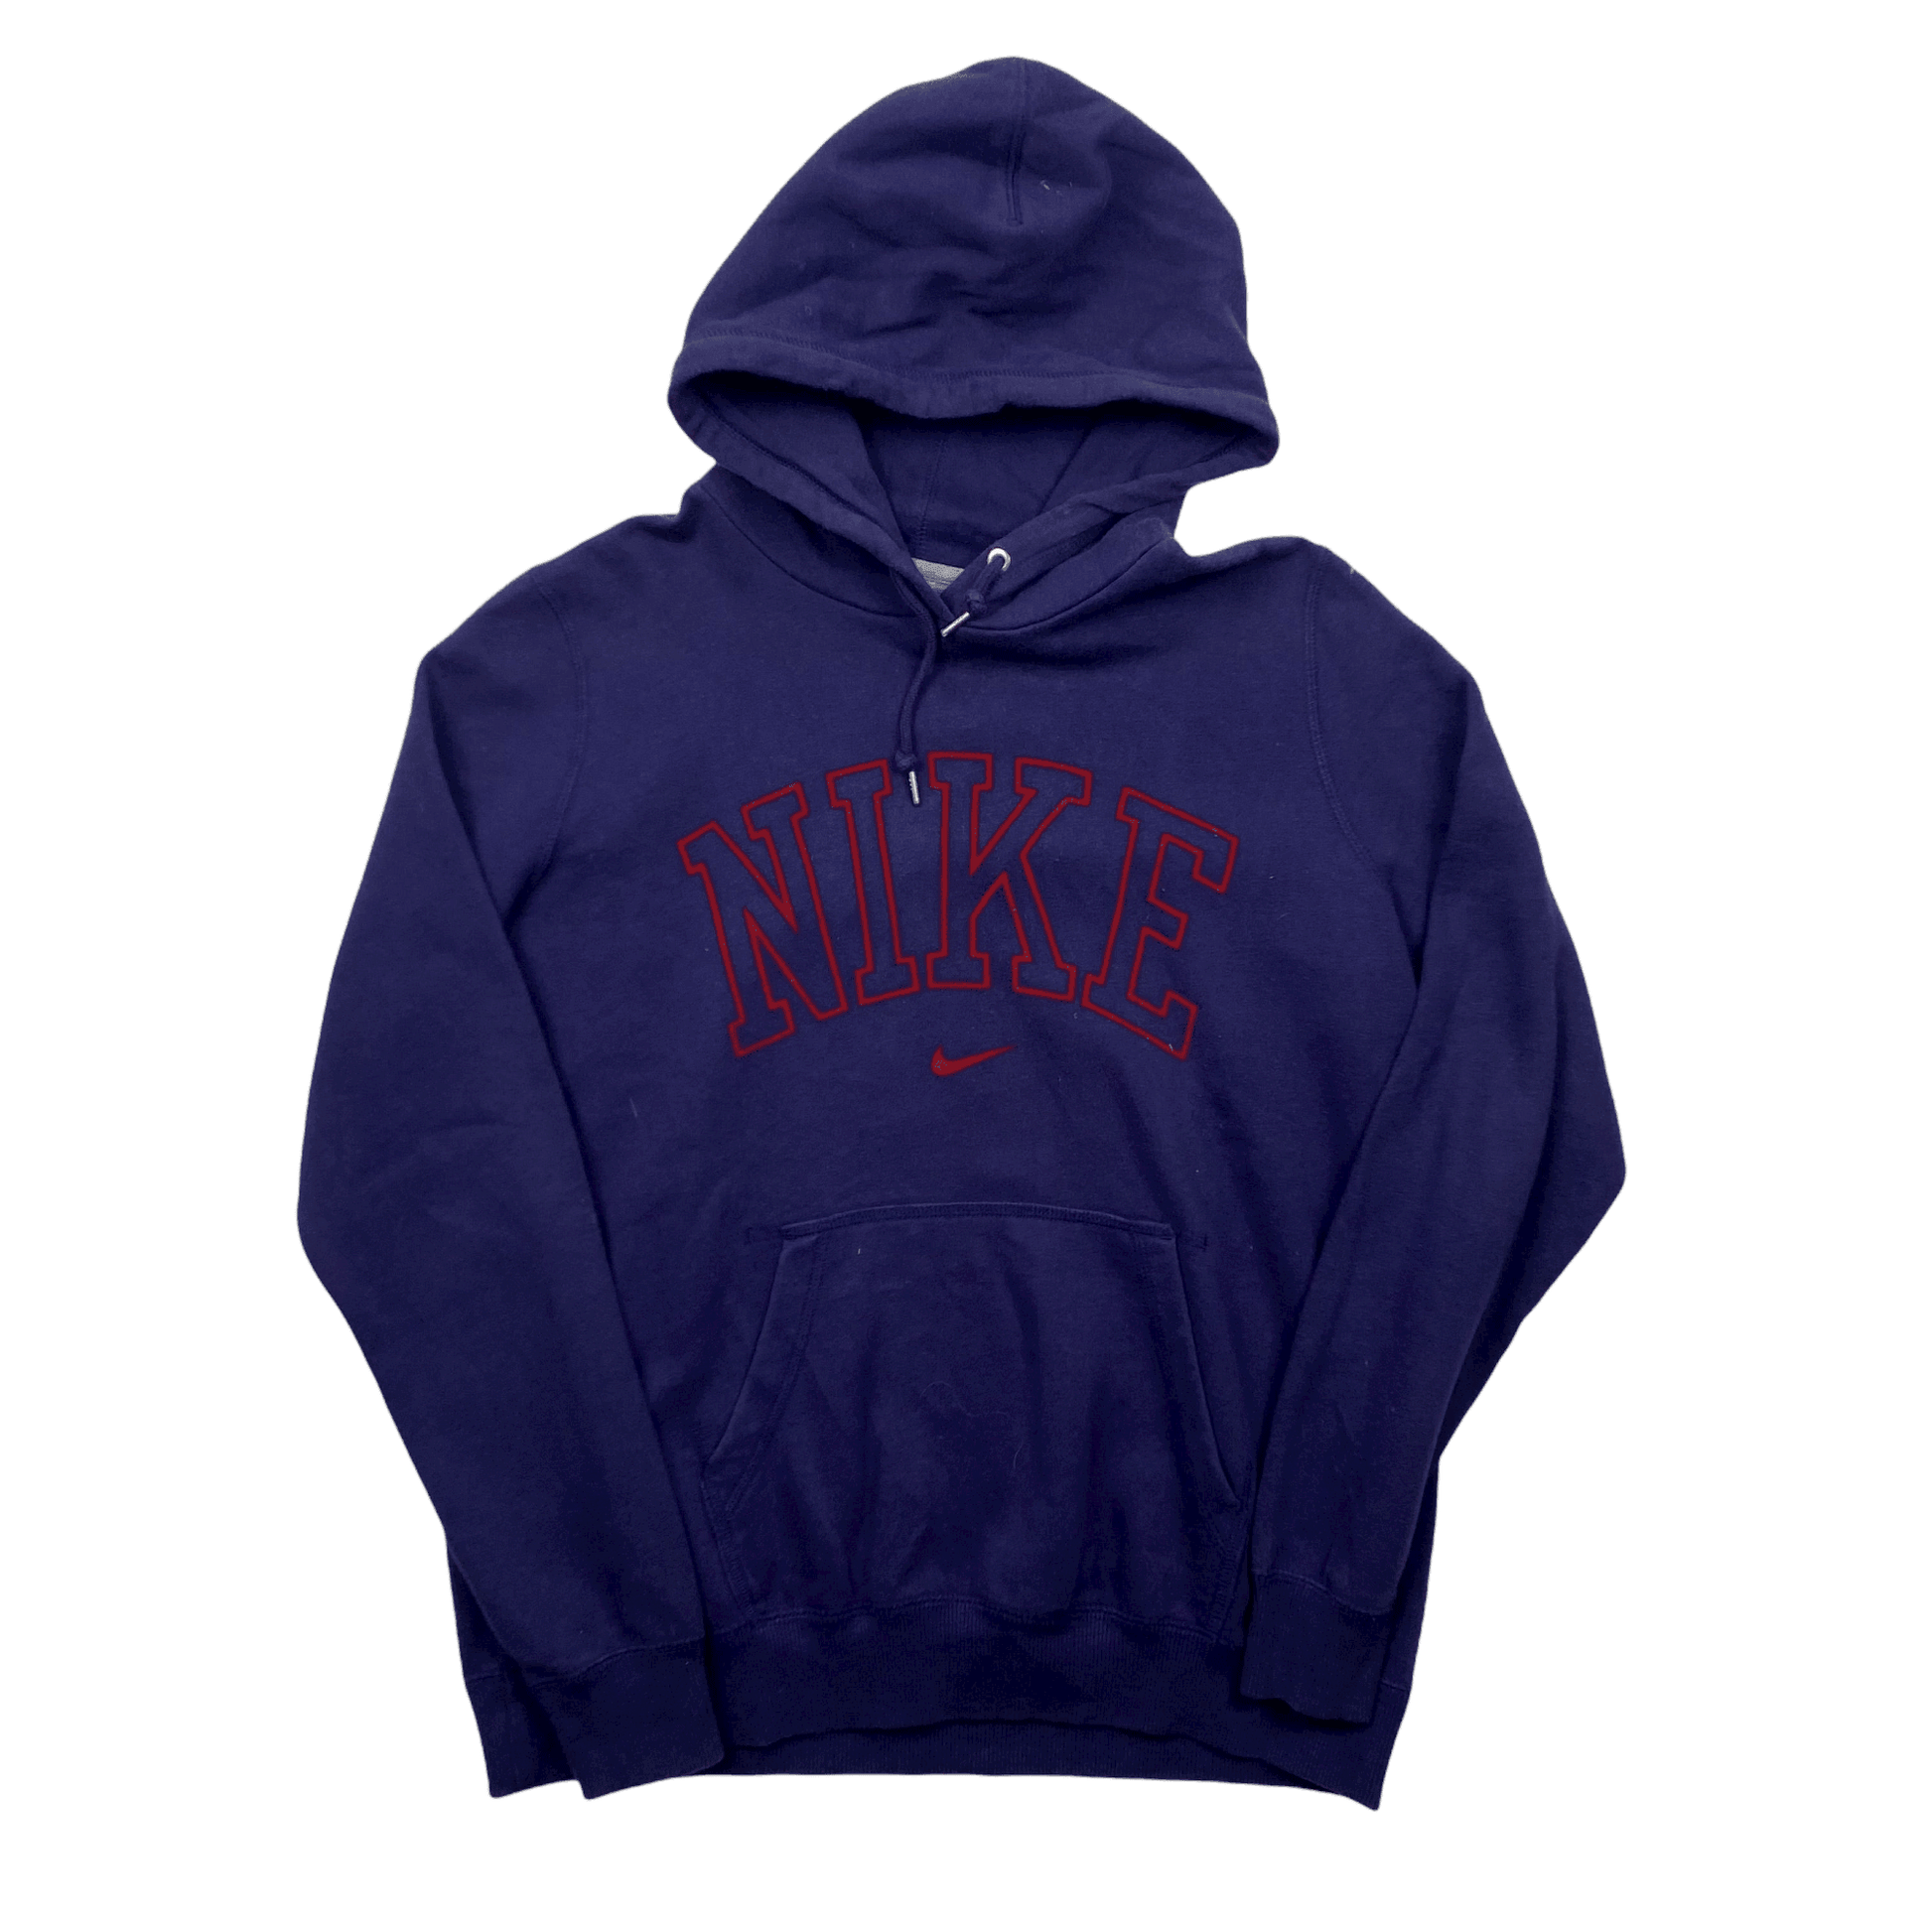 Vintage Navy Blue + Red Nike Spell-Out Hoodie - Extra Large (Recommended Size - Small) - The Streetwear Studio